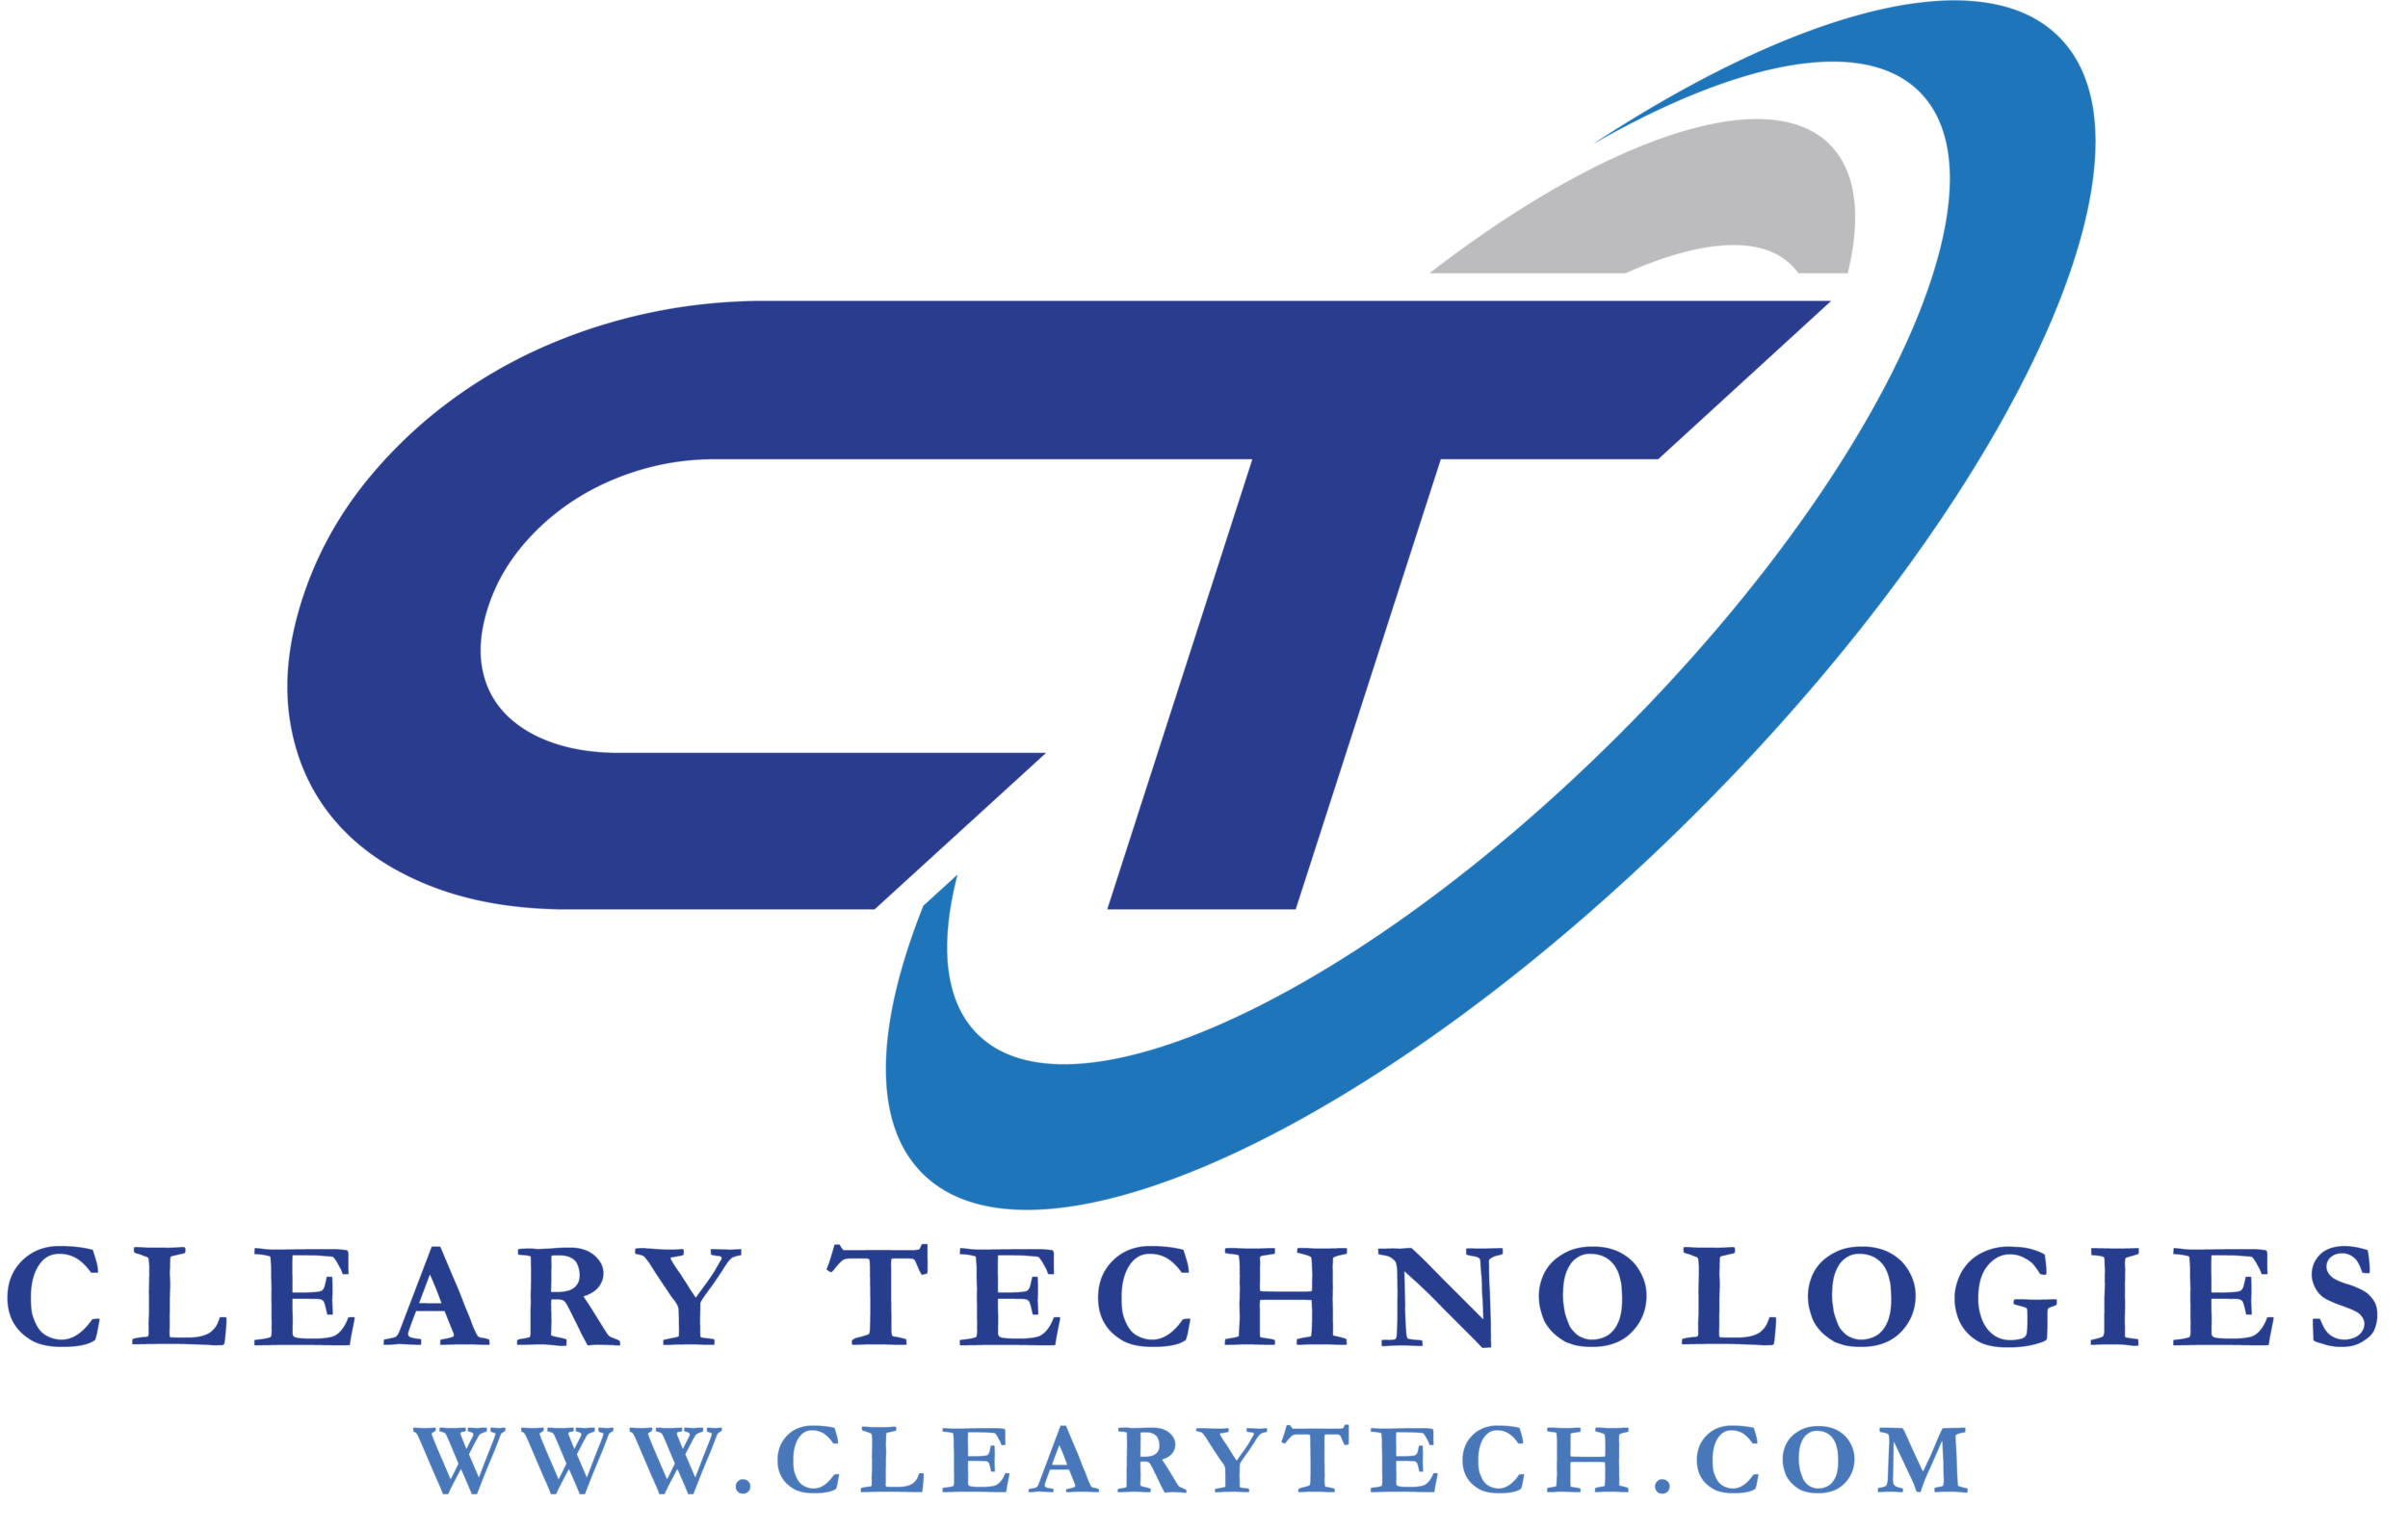 CLEARY TECHNOLOGIES